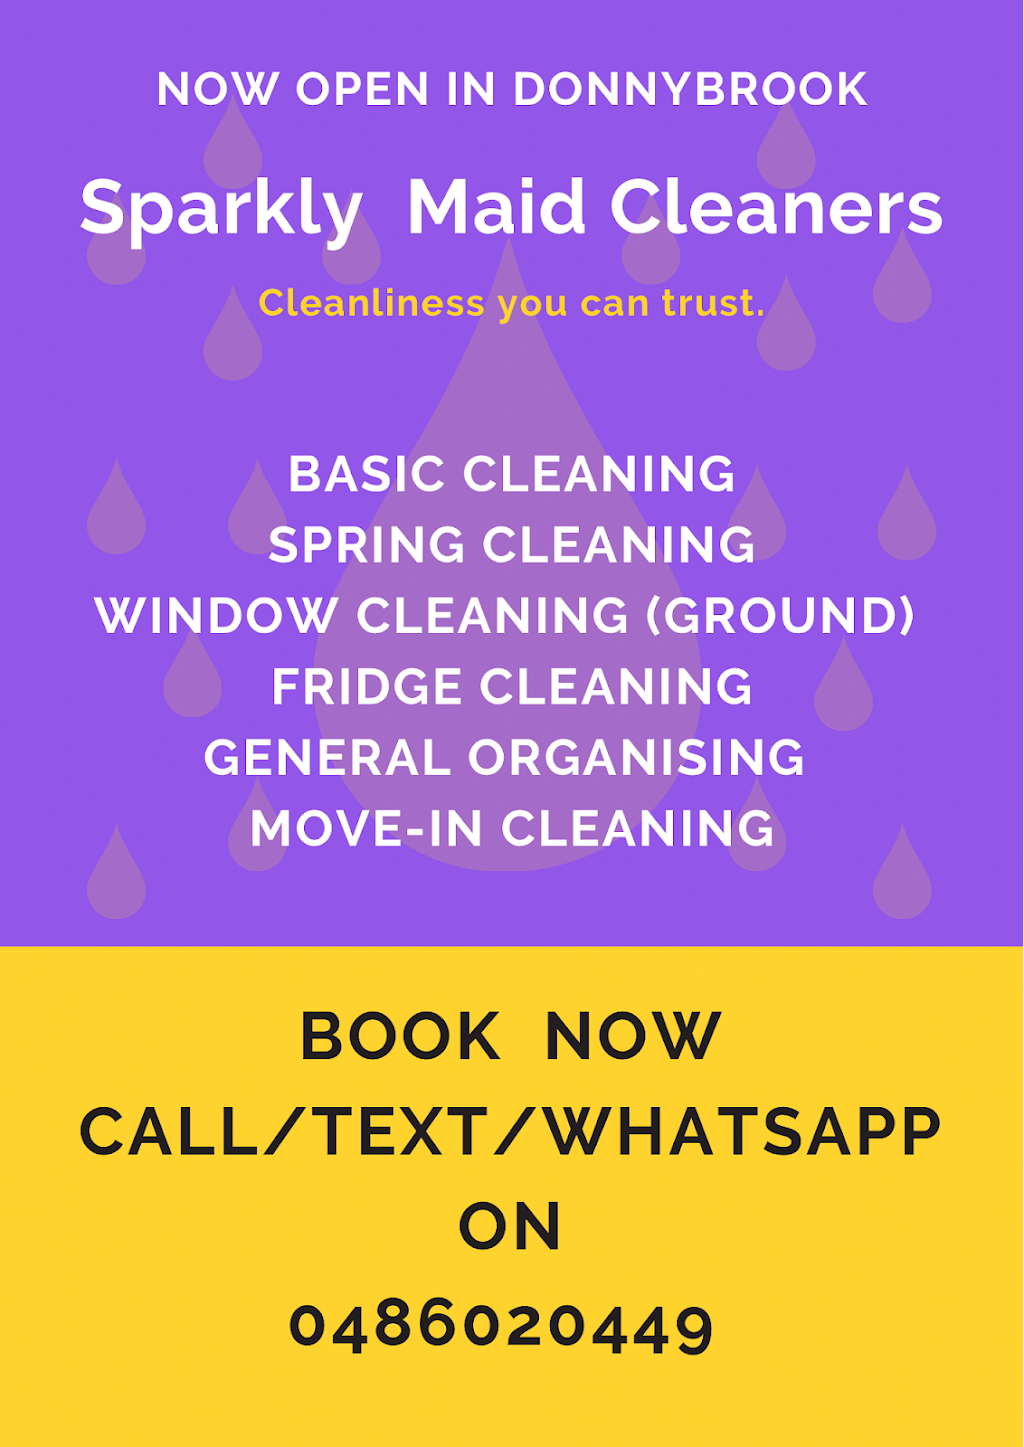 Sparkly Maid Cleaners | Vicinity Rd, Donnybrook VIC 3064, Australia | Phone: 0486 020 449